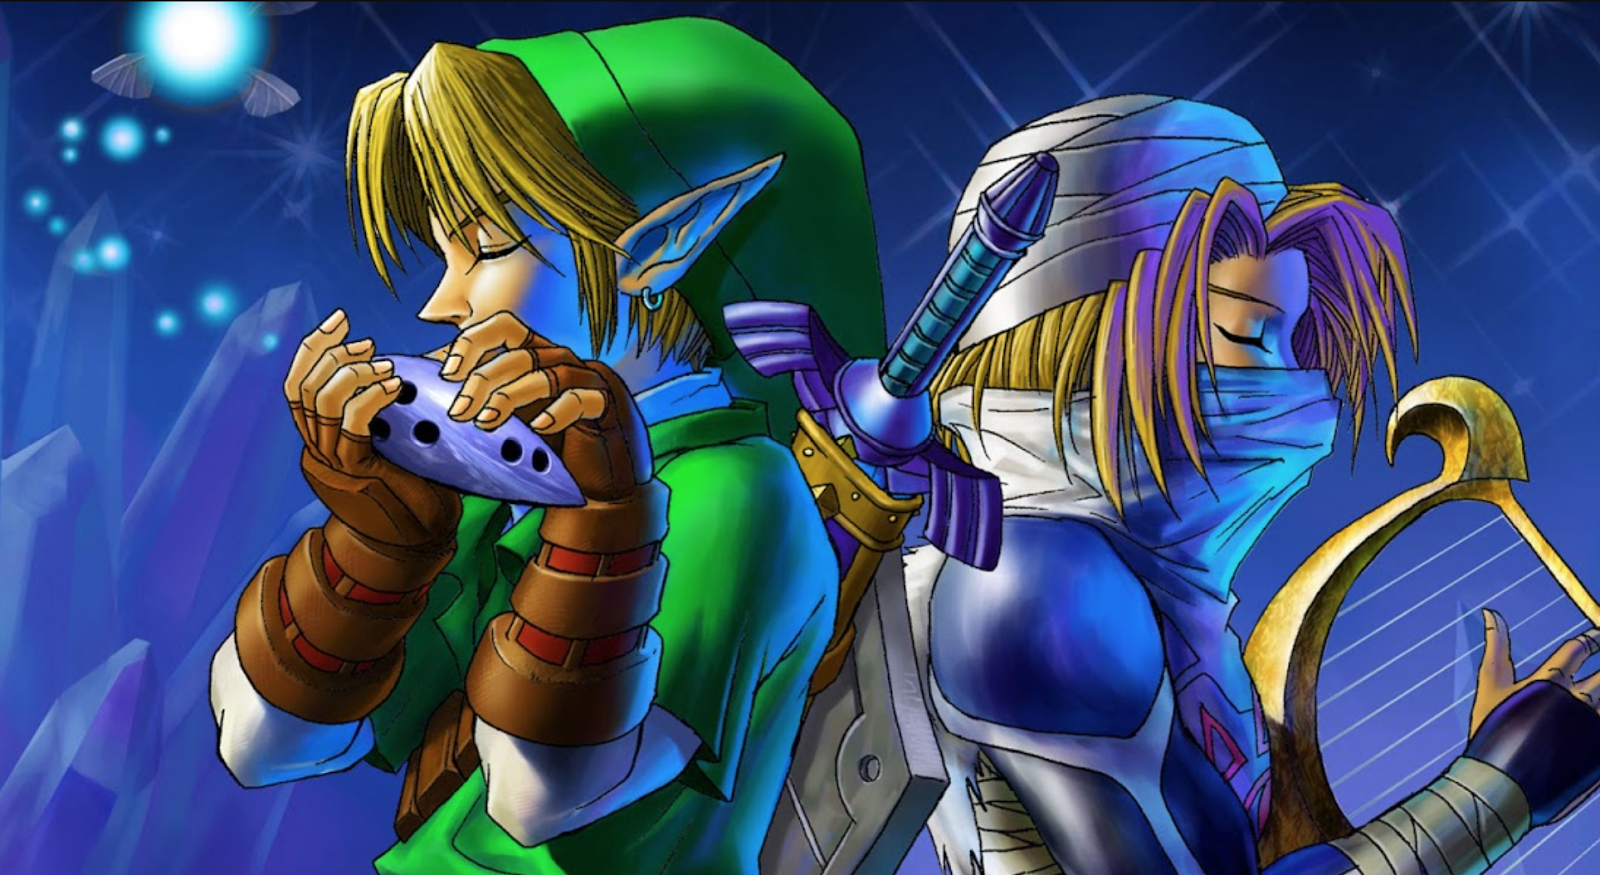 Four-Year Effort To Beat Ocarina Of Time In Under 17 Minutes Finally Succeeds